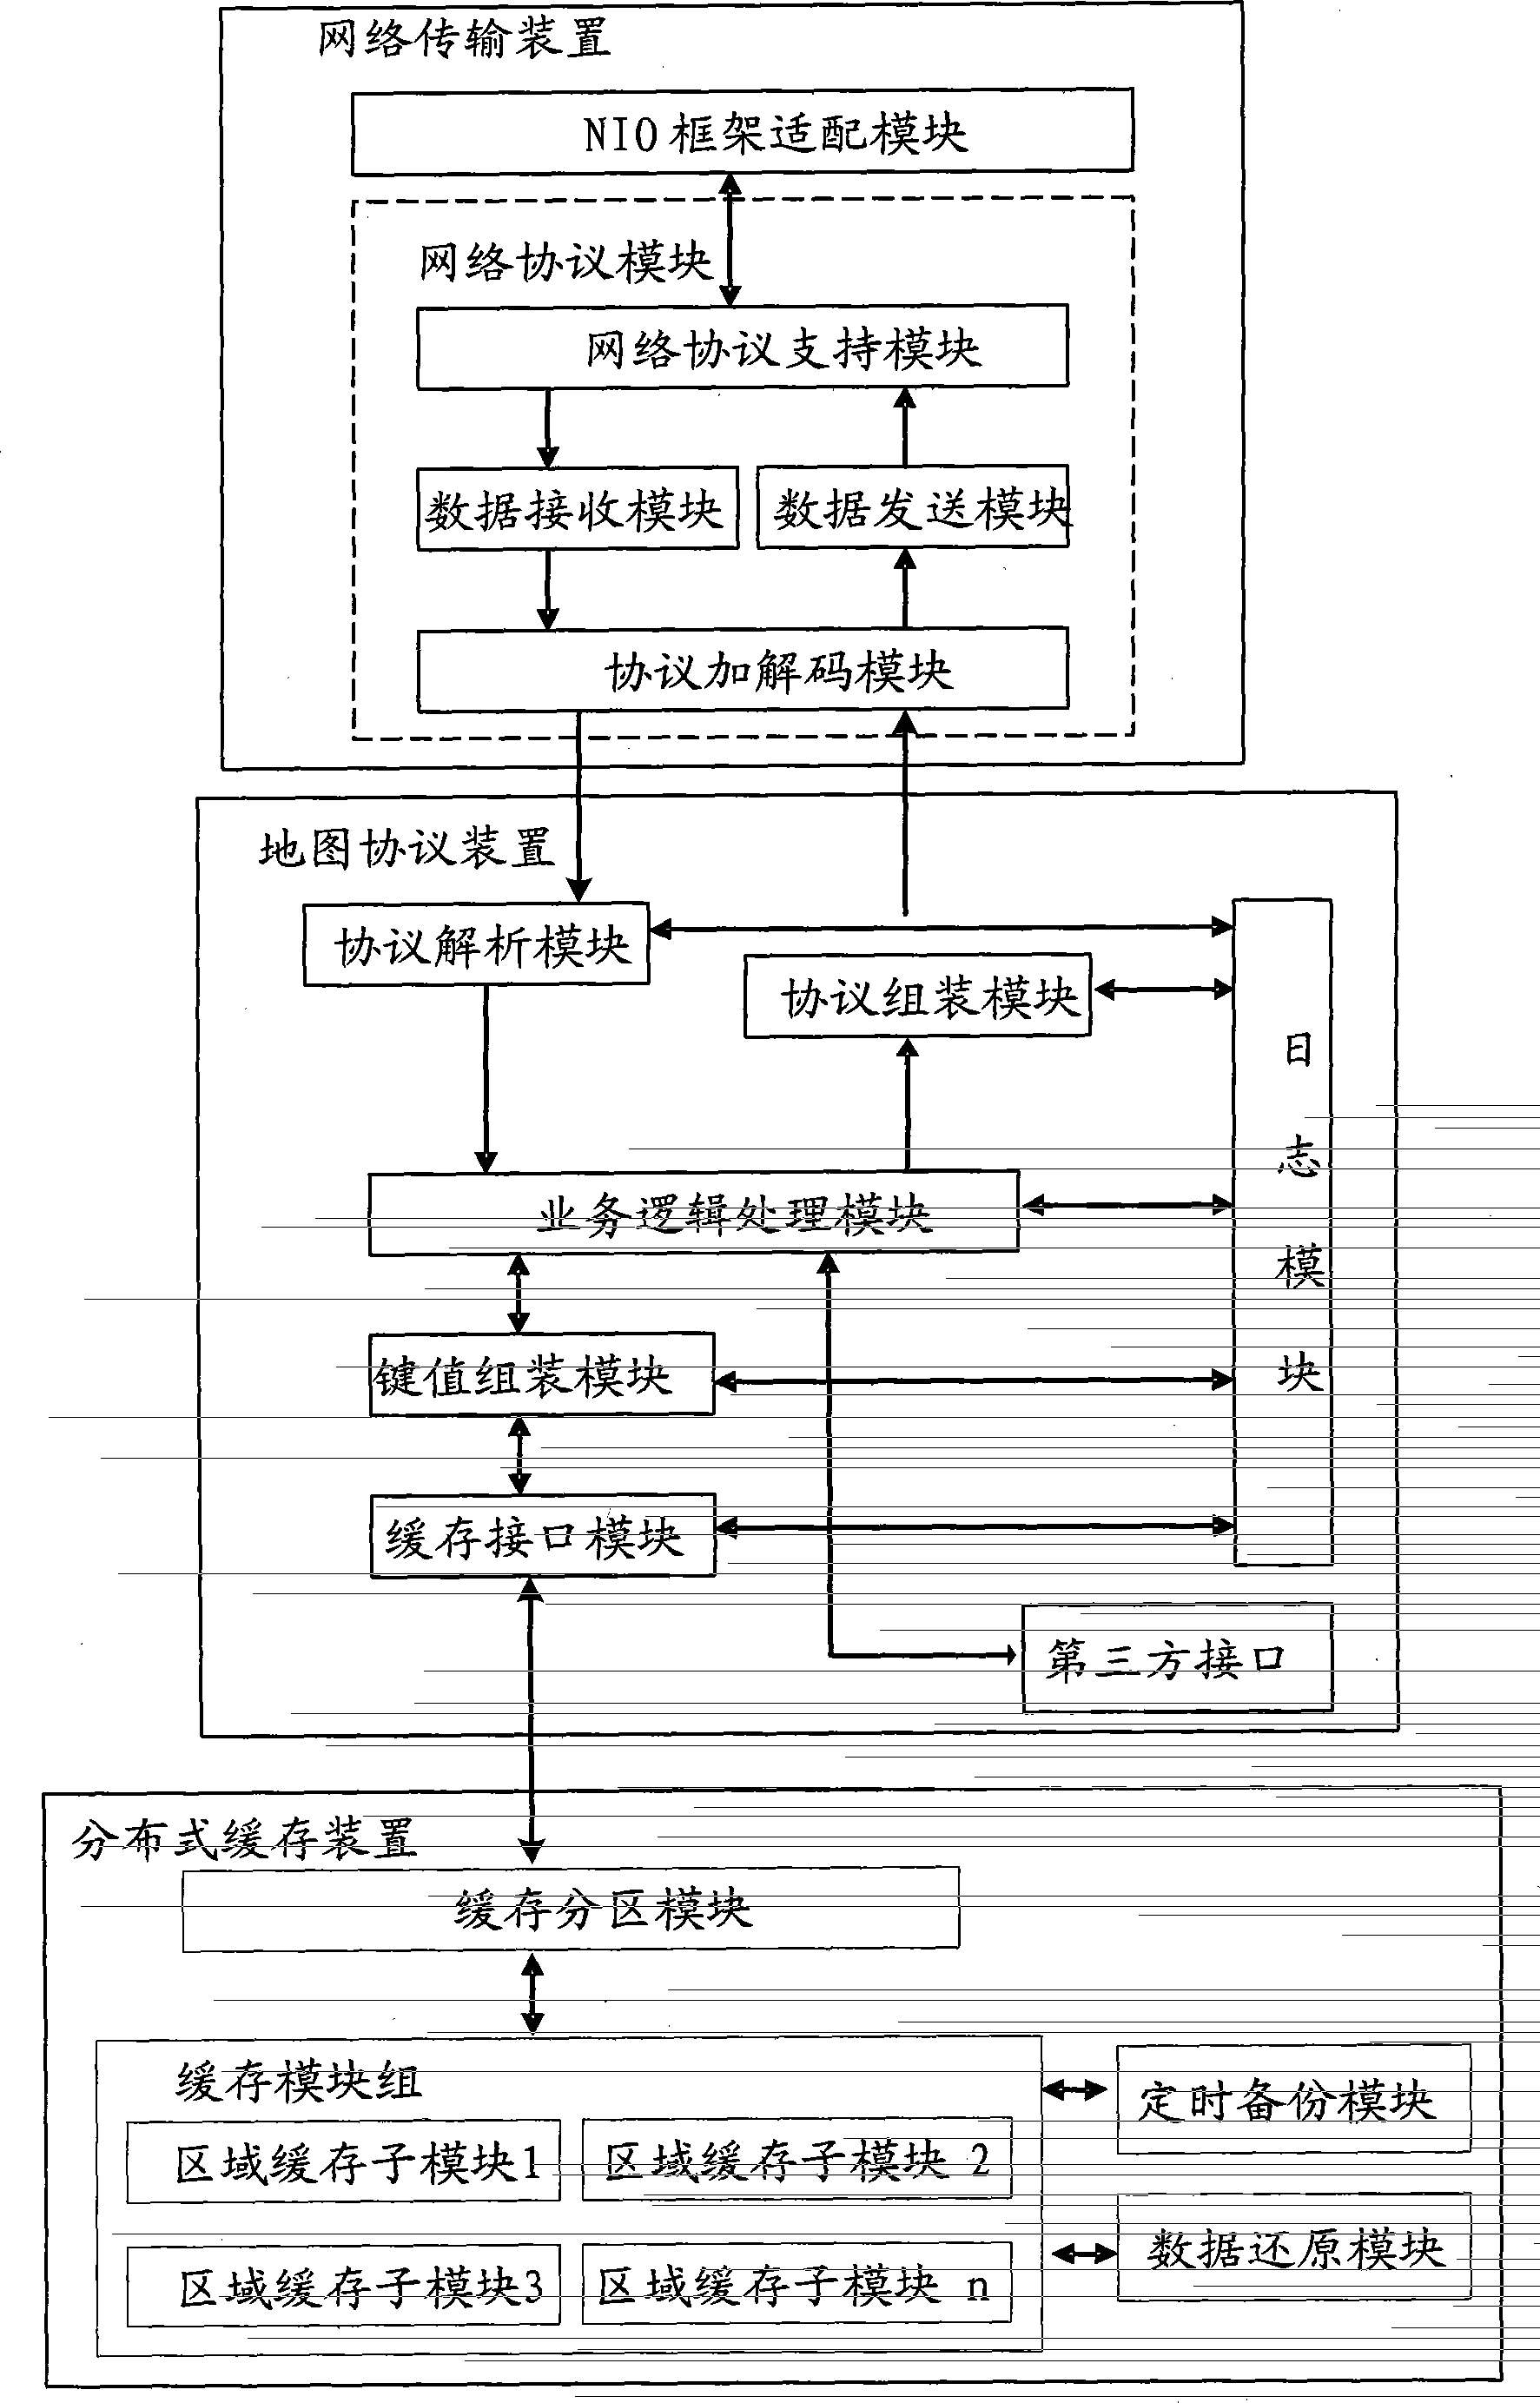 A map display system and method